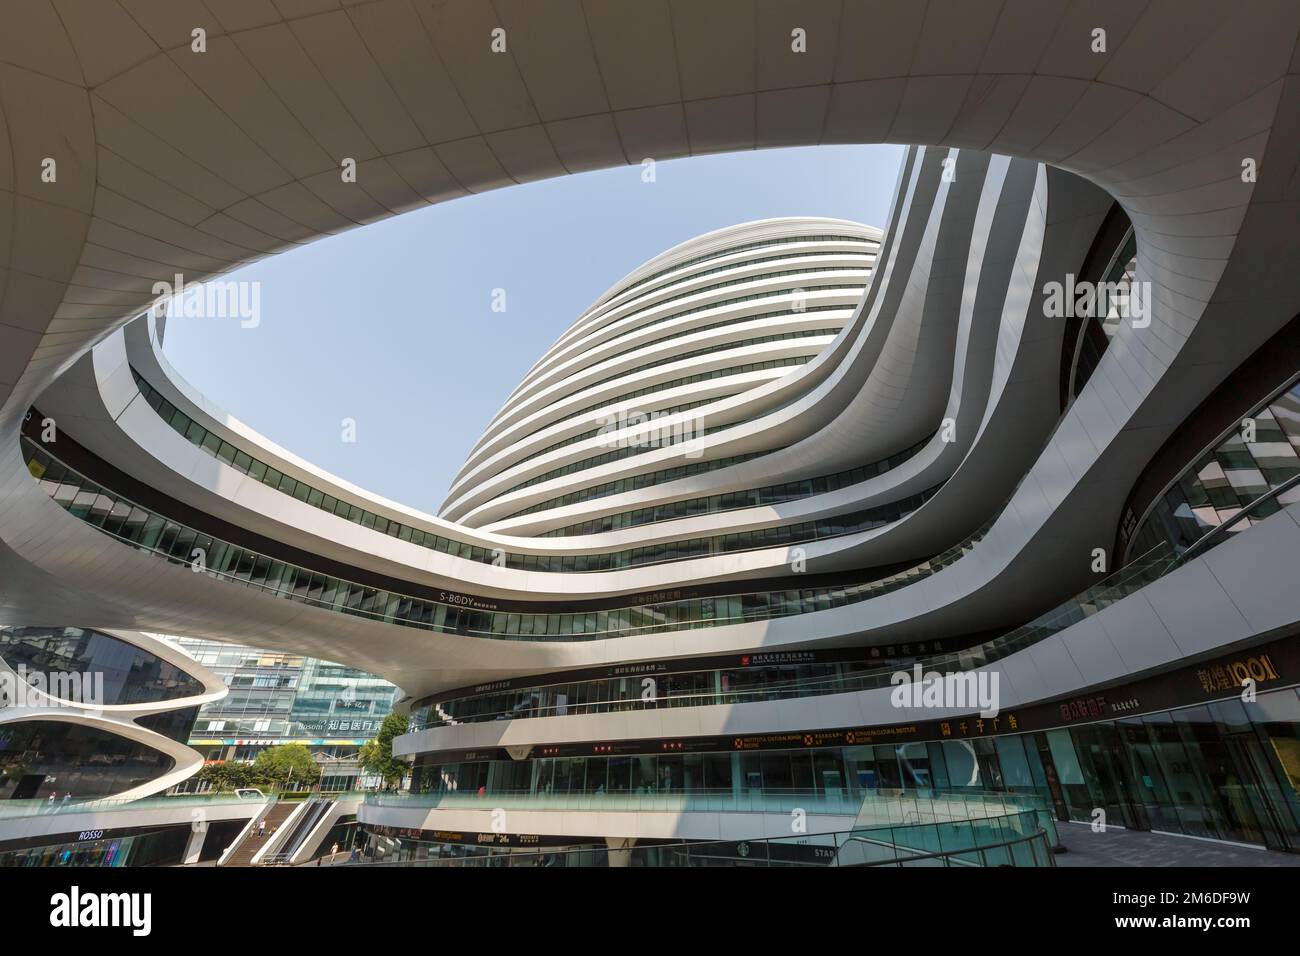 Galaxy SOHO Beijing building shopping mall modern architecture in China ...